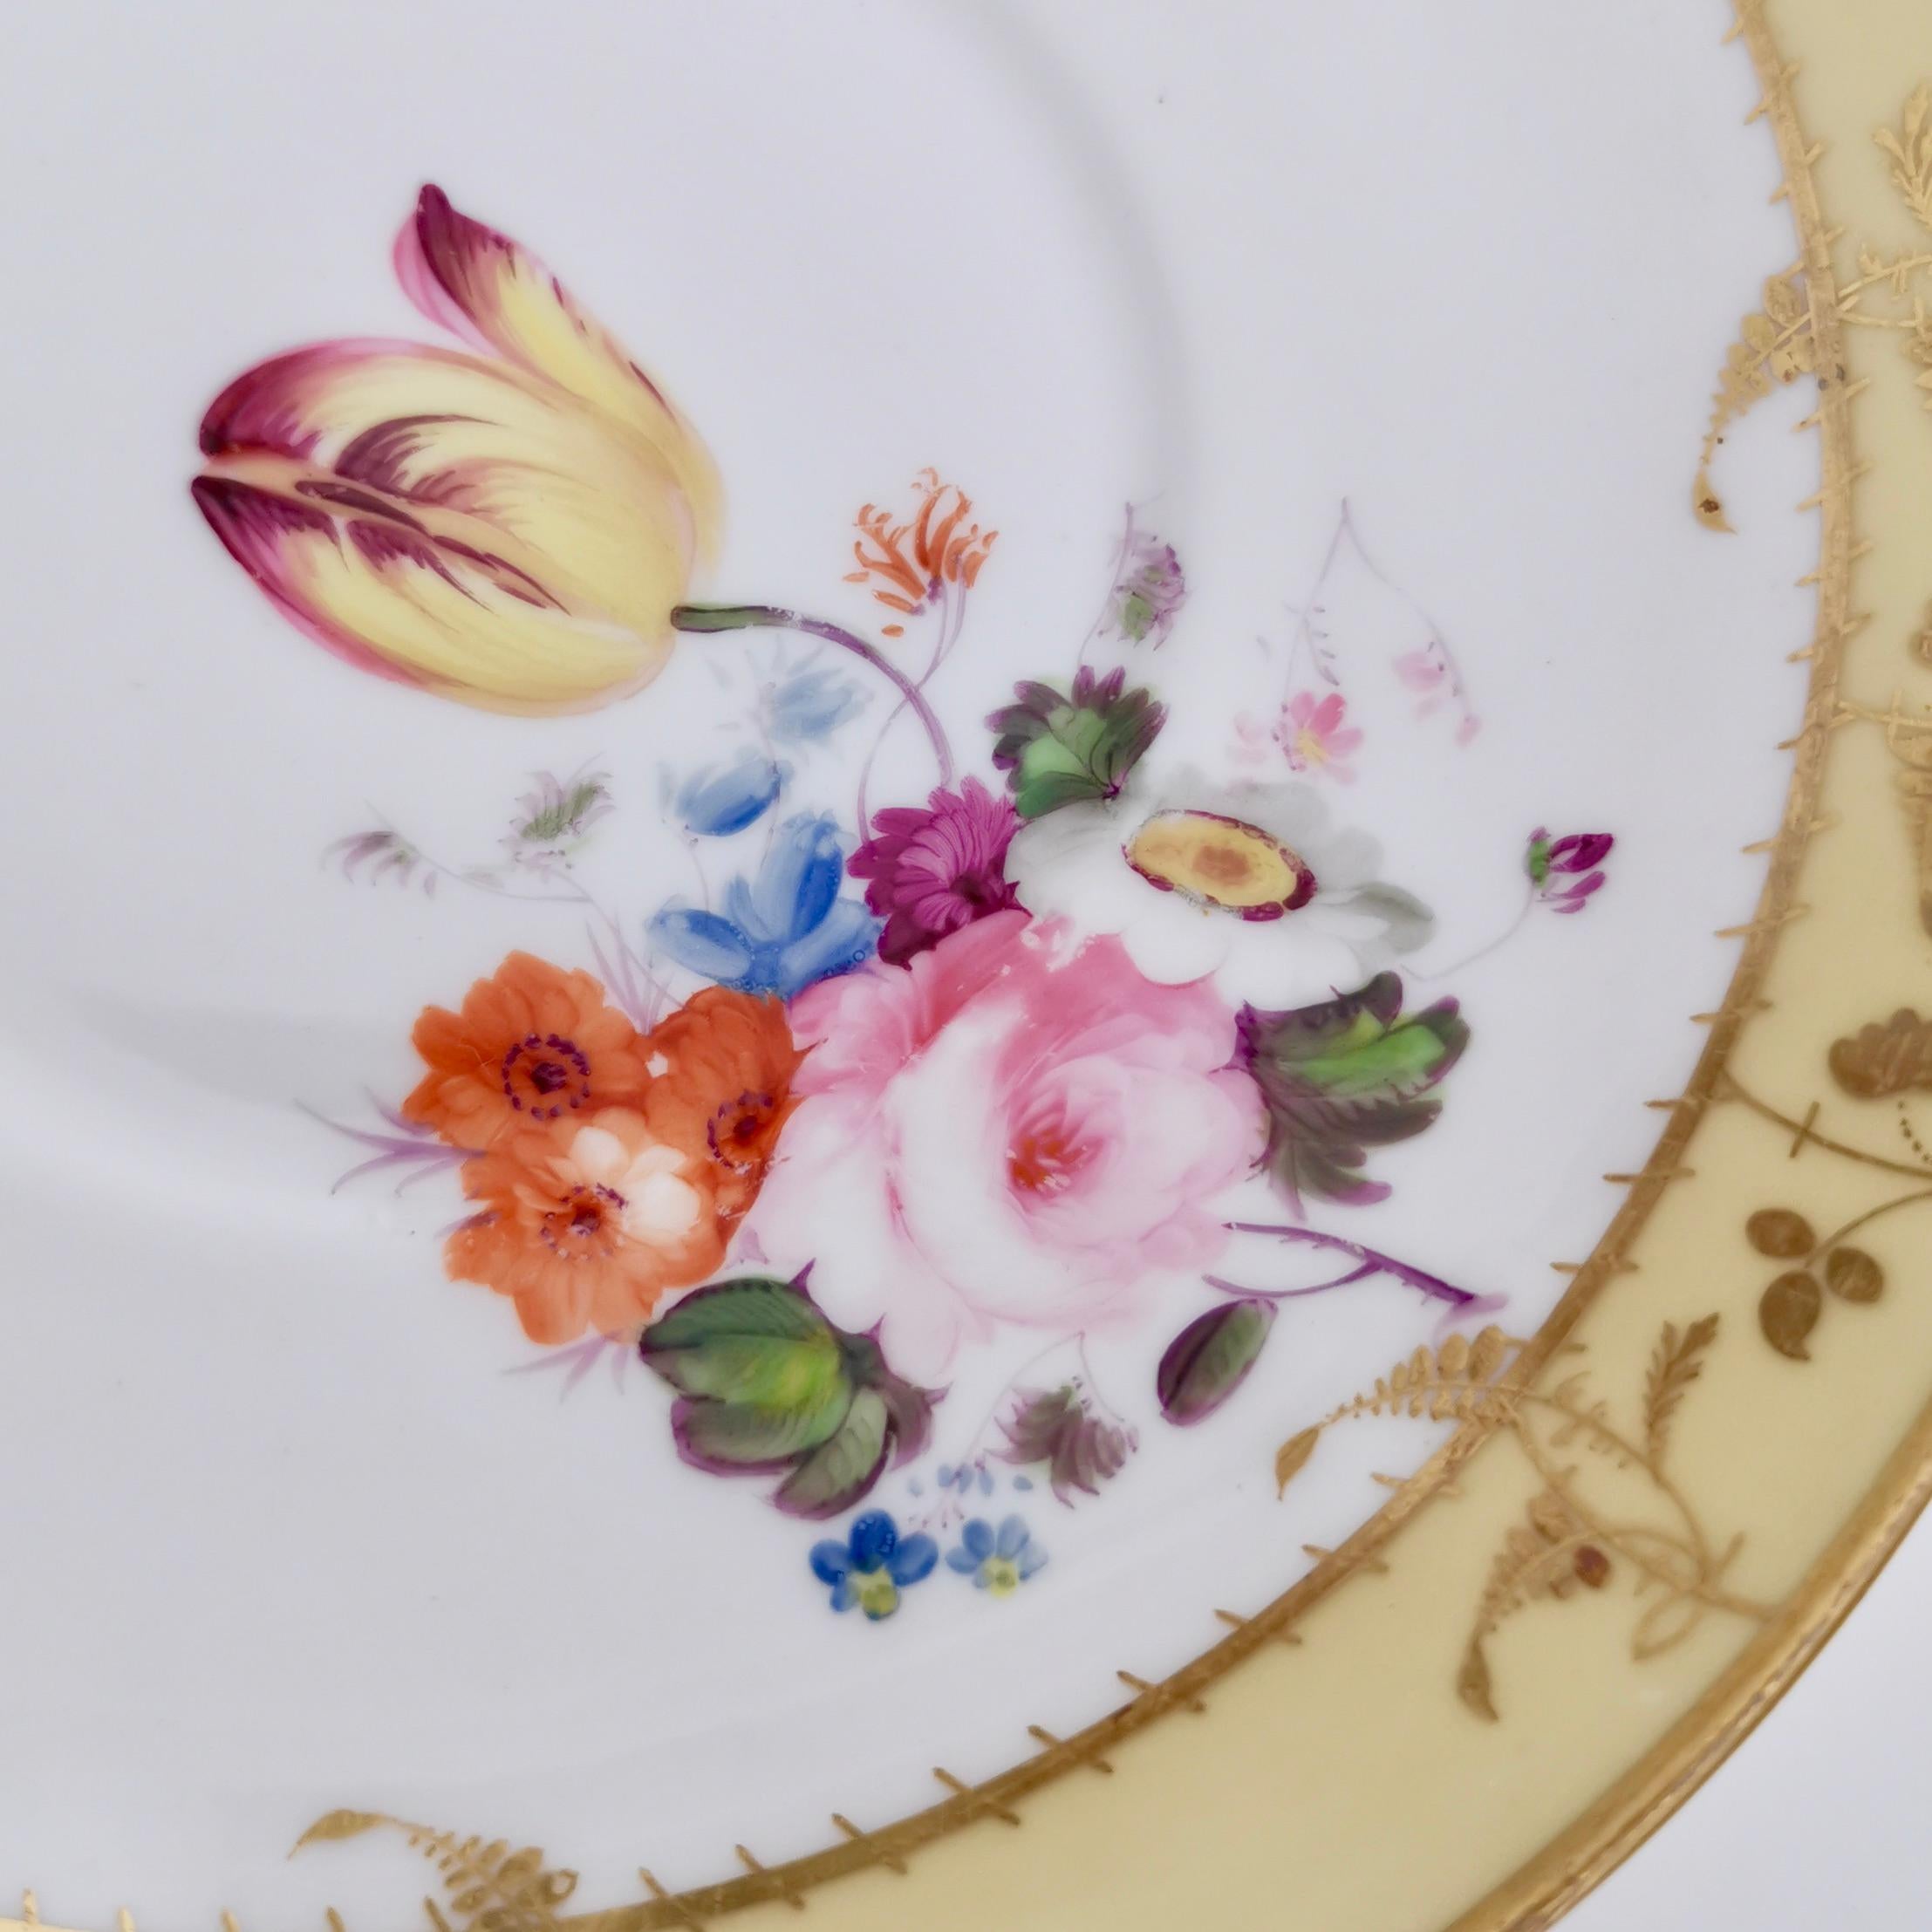 Minton Porcelain Teacup, Yellow with Hand Painted Flowers, Regency, circa 1825 8